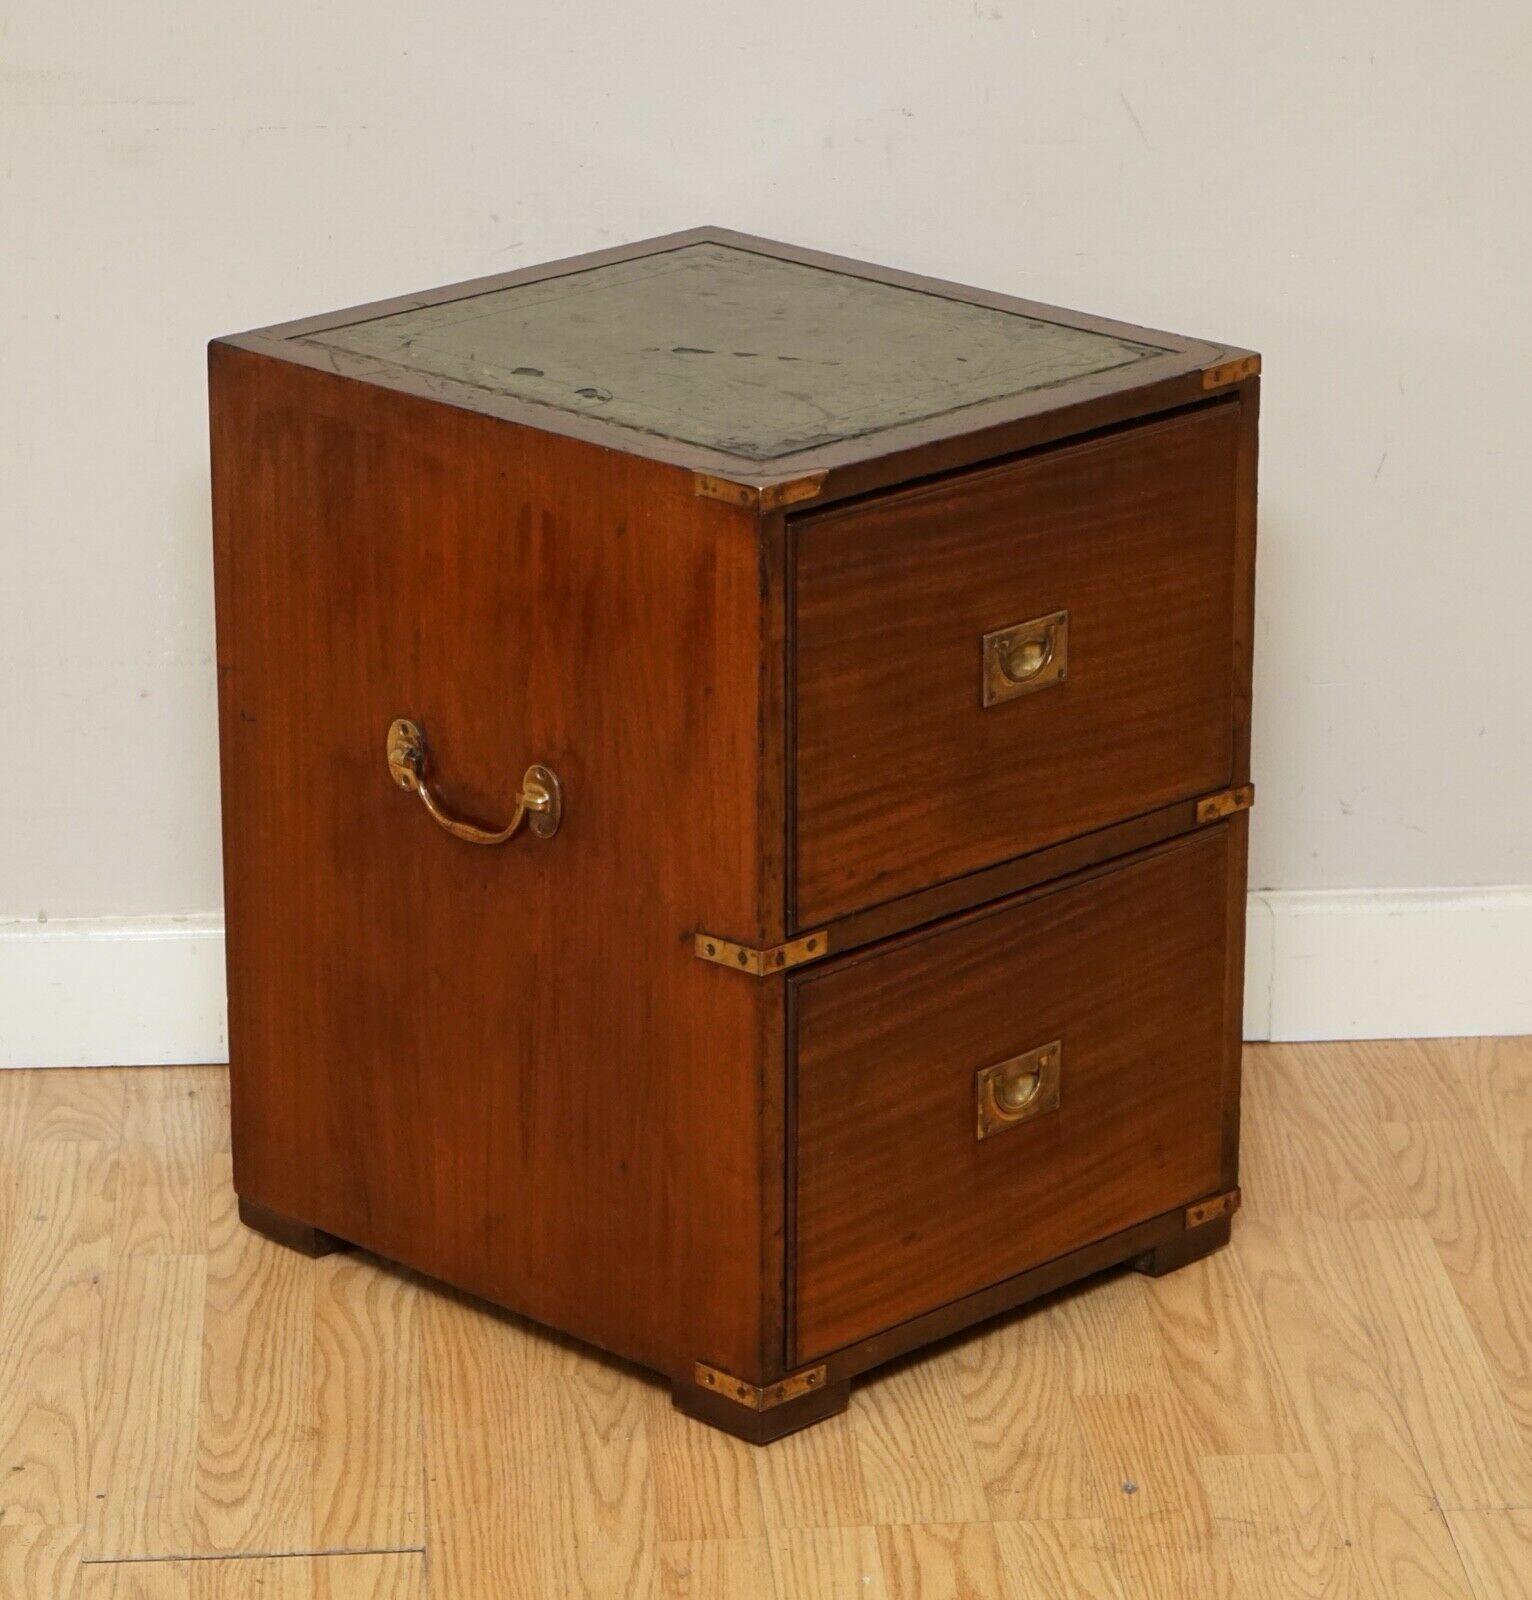 We are delighted to sell this beautiful vintage military campaign chest of drawers.

This chest can go perfectly in your bedroom as a nightstand or in your living room as a lamp or wine table.

The leather top has some imperfections, so please